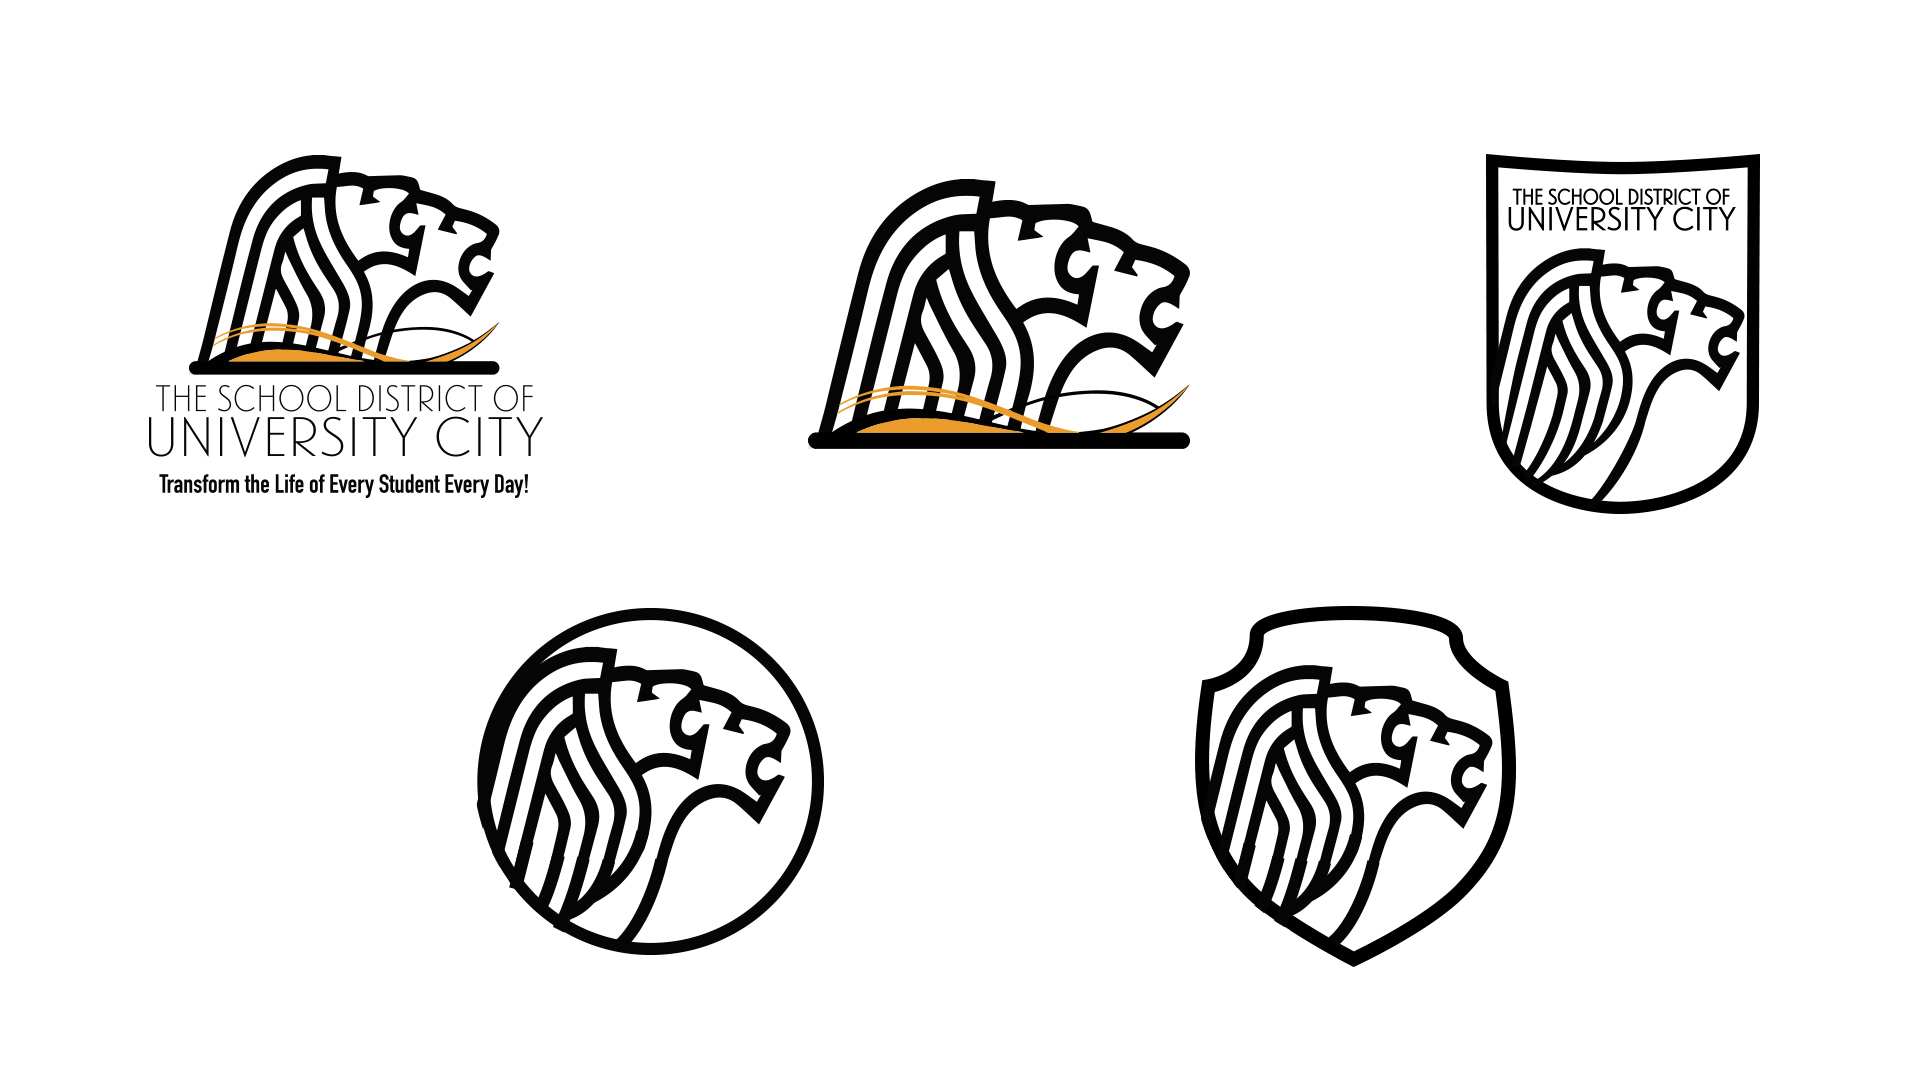 Our exploration of the School District of University City's logo